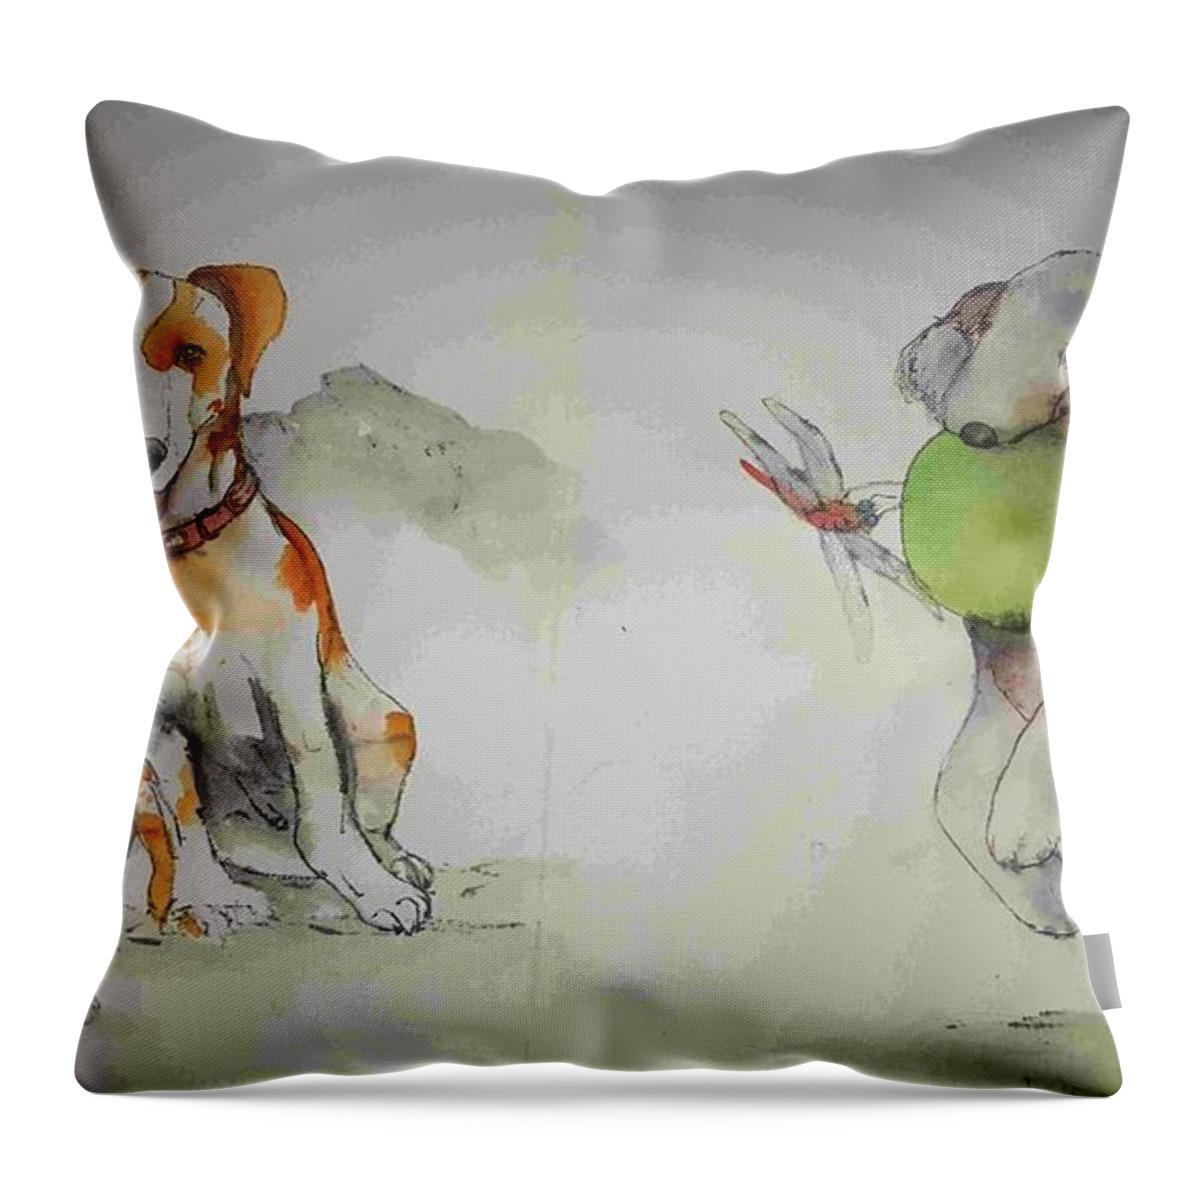 Dogs Throw Pillow featuring the painting For love of a dog album #5 by Debbi Saccomanno Chan